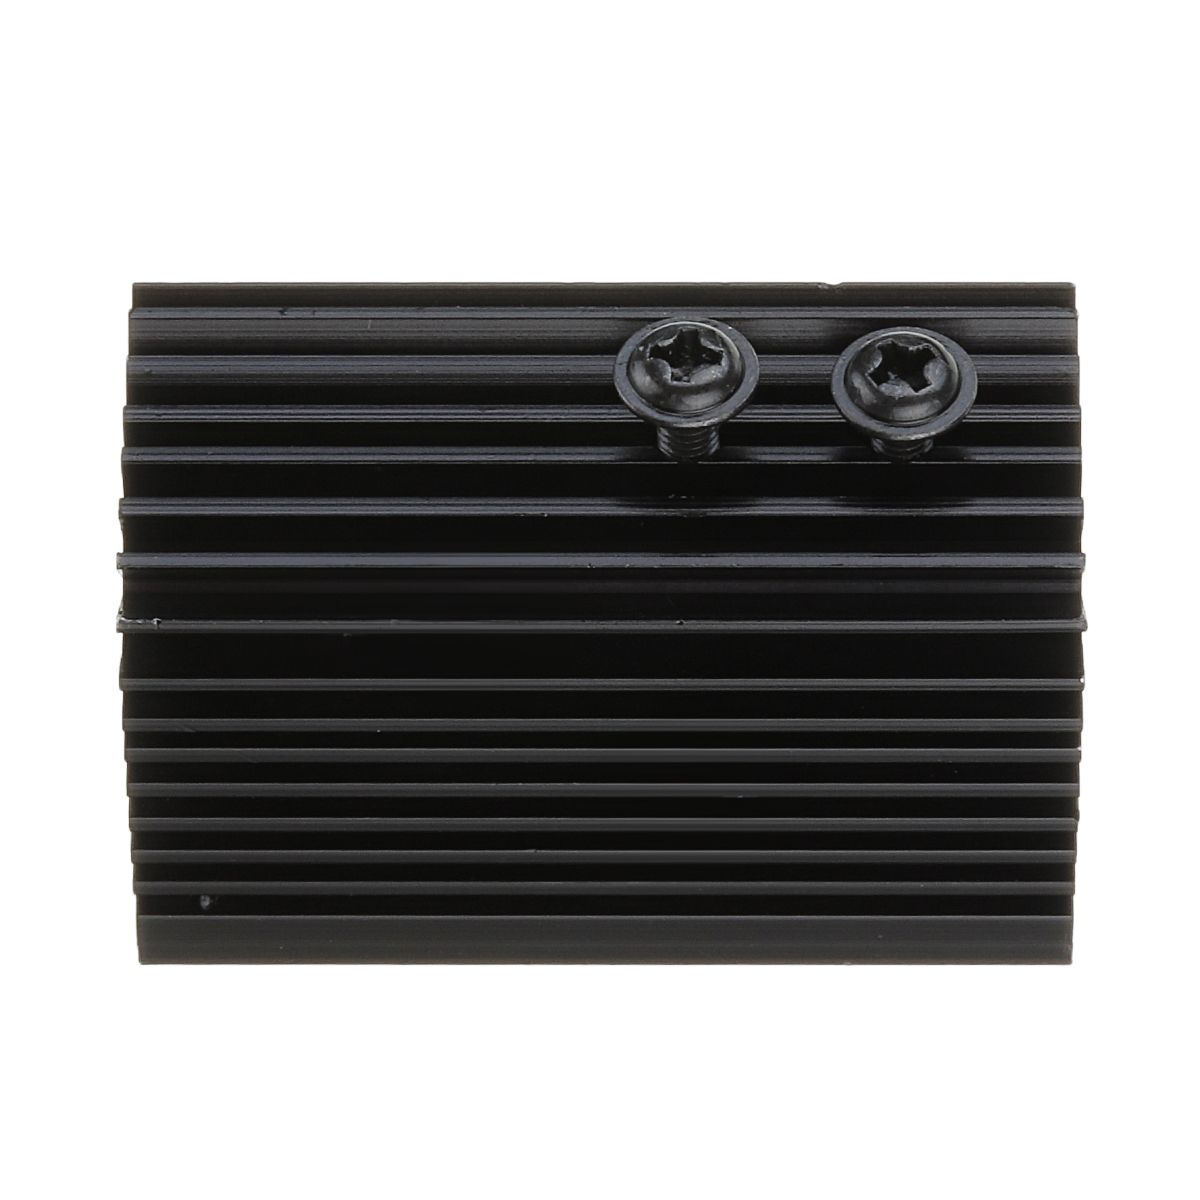 12mm-Aluminum-Heat-Sink-Groove-Fixed-Radiator-Seat-for-Laser-Module-Parts-Cooling-Mount-Holder-1446029